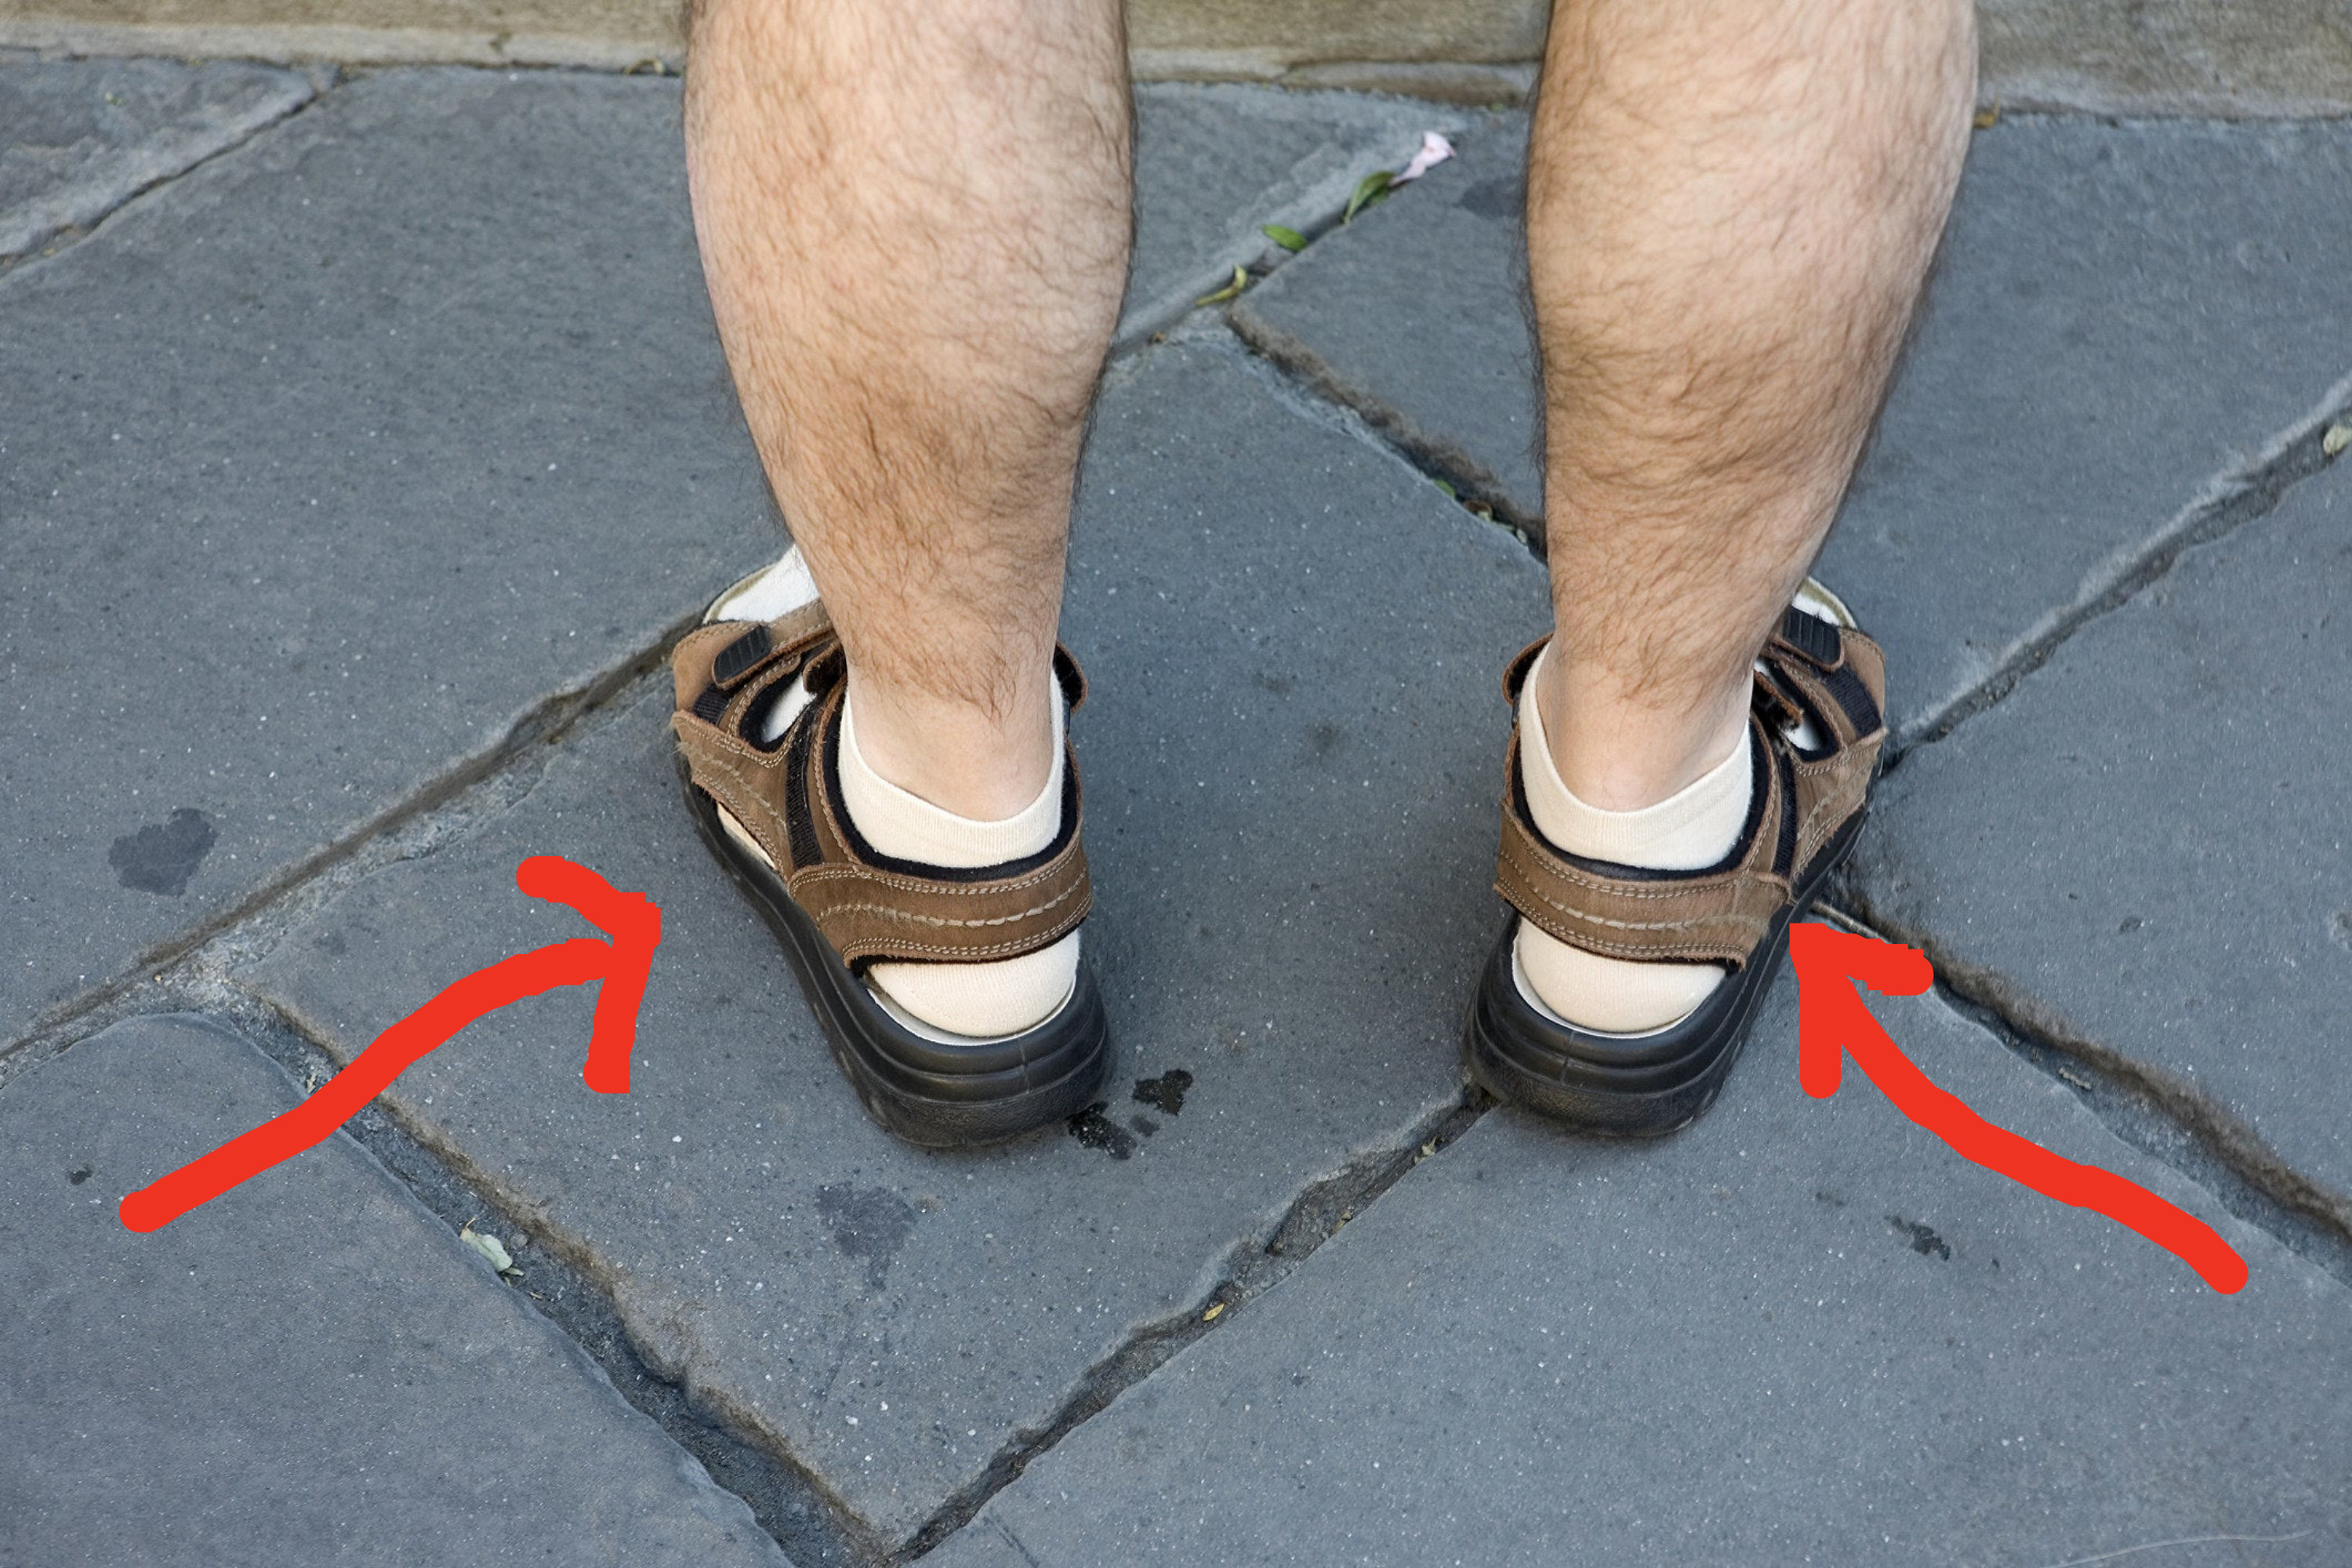 arrows pointing to a person wearing socks with their sandals